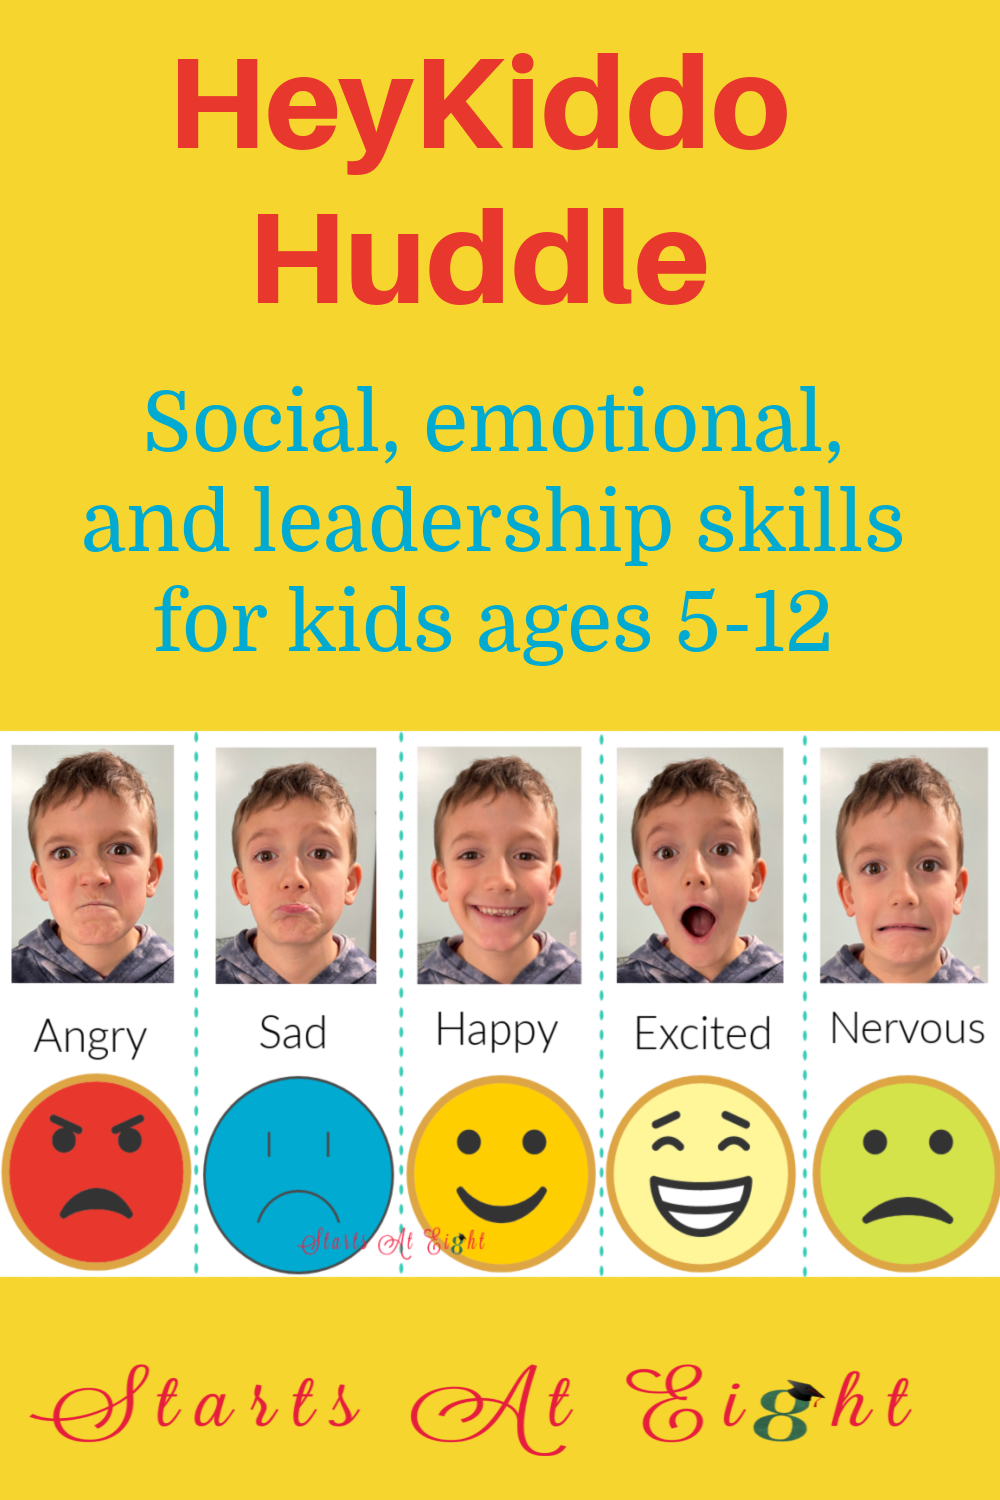 HeyKiddo Huddle is a comprehensive social-emotional curriculum for homeschooling parents that provides quick, easy-to-implement ideas for addressing big feelings with kids (ages 5-12). A review from Starts At Eight